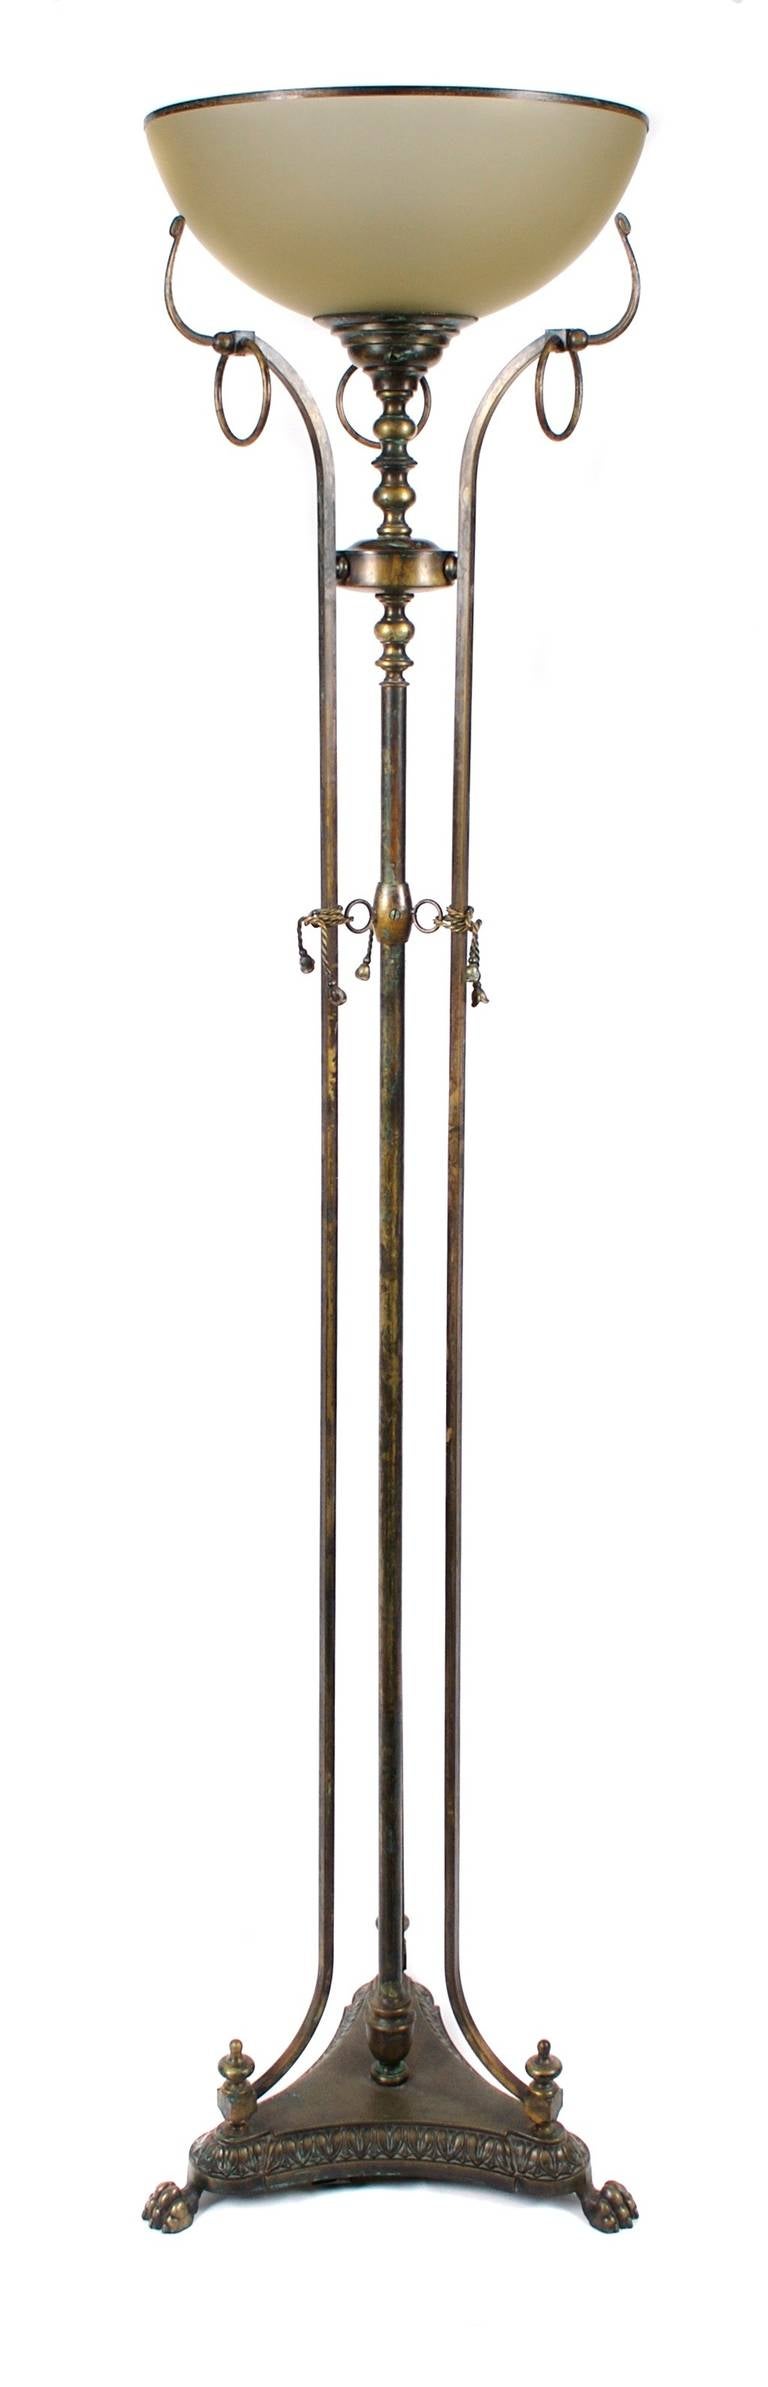 A midcentury patinated bronze floor lamp, most likely French. One up light; frosted glass shade with bronze rim. Twisted rope detailing; claw feet.